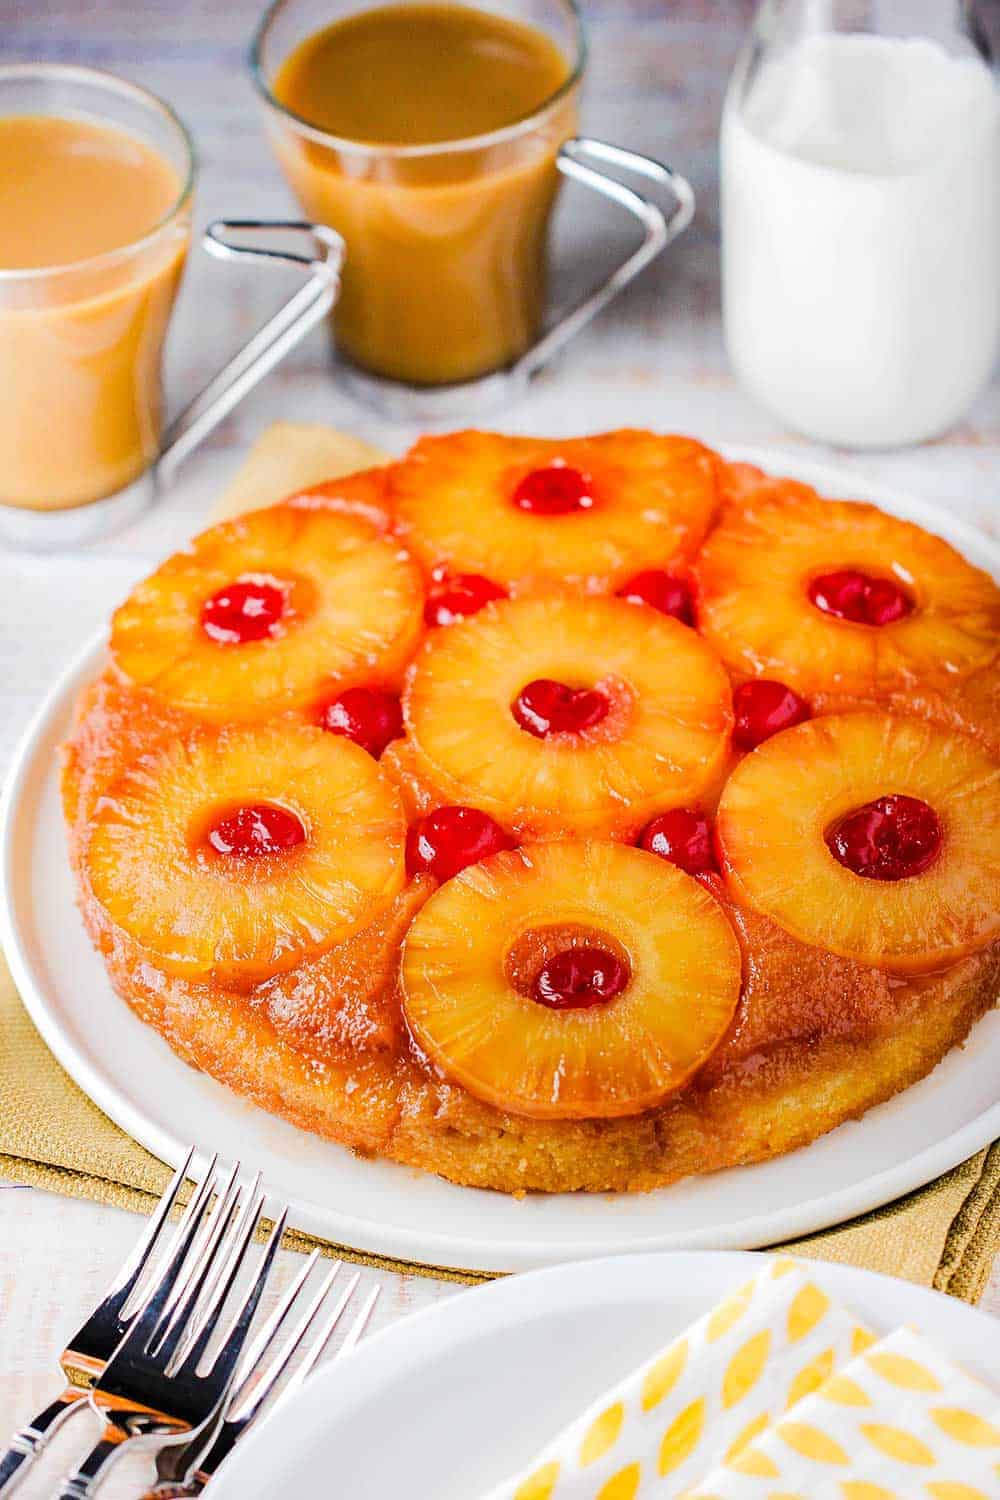 A pineapple upside-down cake on a white platter next to a glass of orange and a cup of coffee.